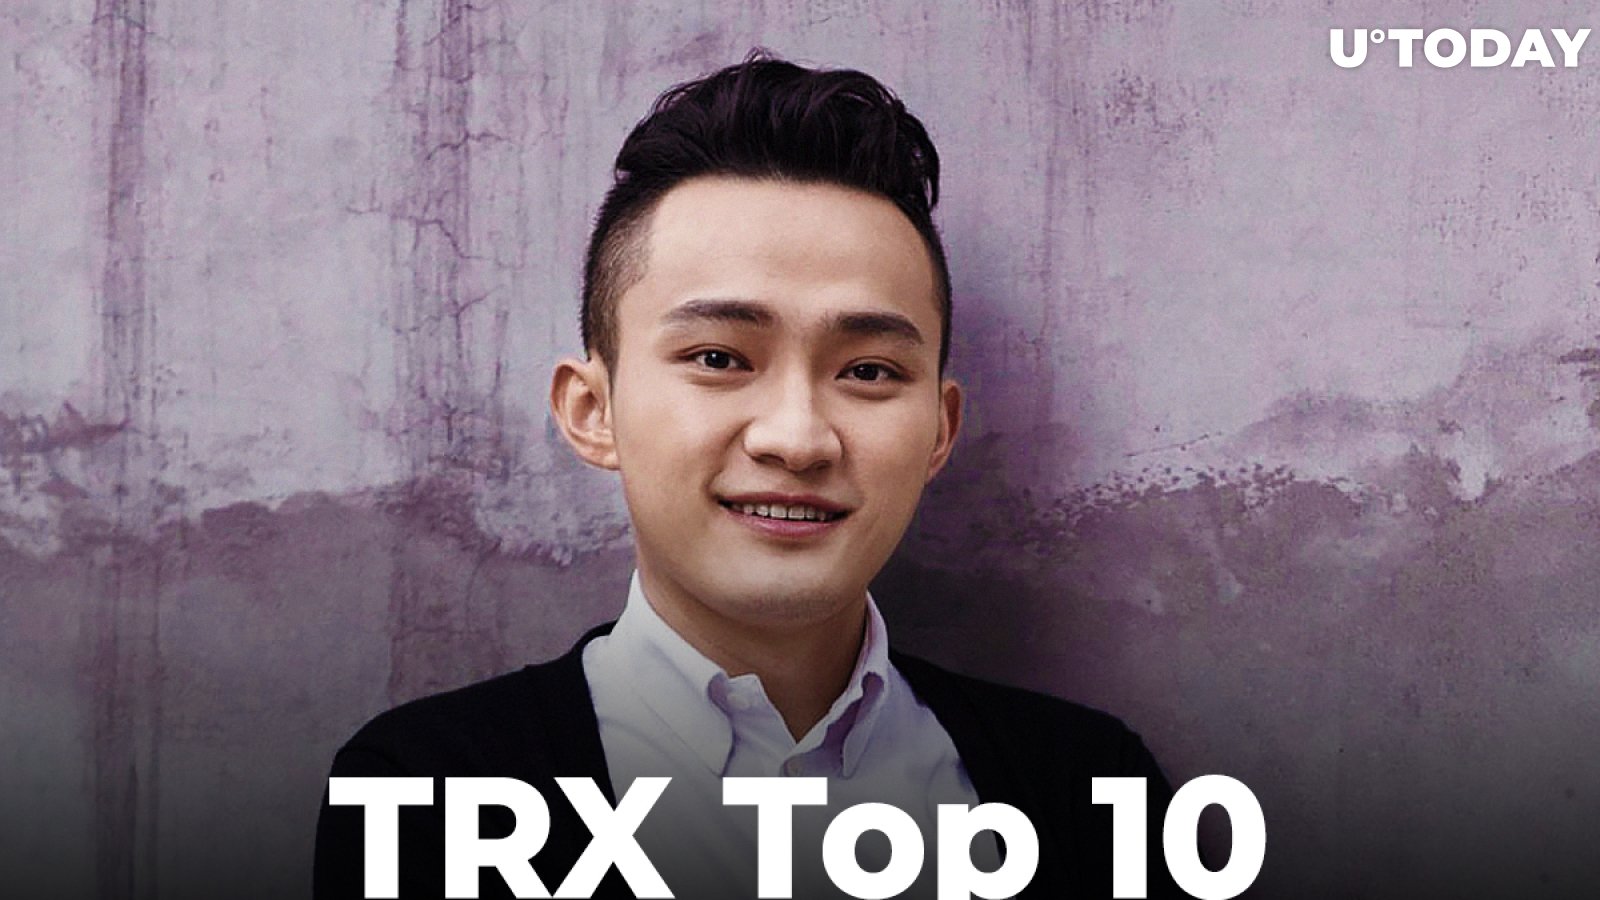 Tron (TRX) Surges to Top 10 as Justin Sun Teases TRON-Based Decentralized Stablecoin 